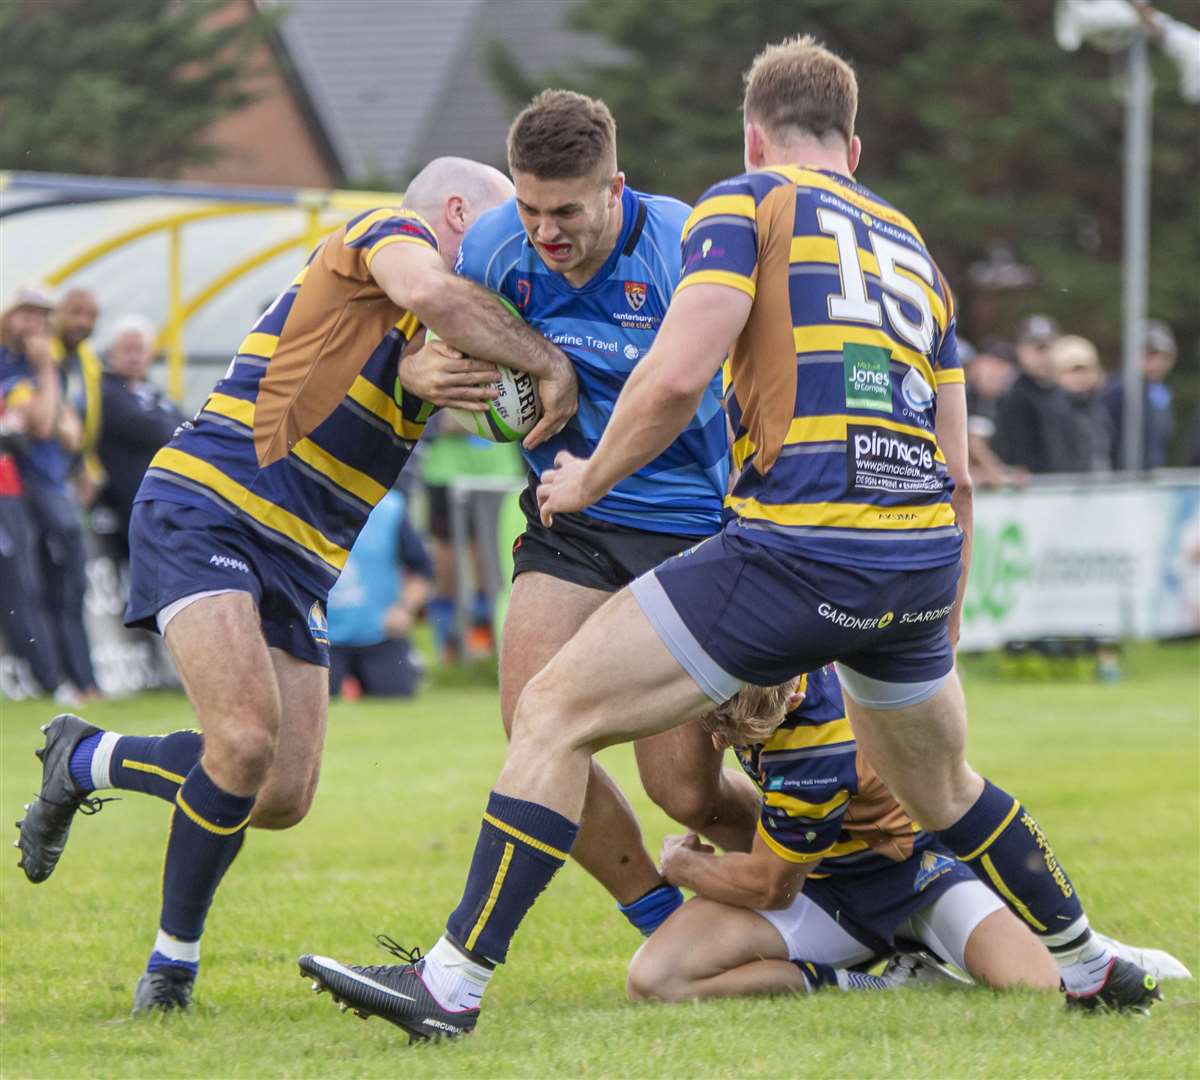 Canterbury's Will Waddington on a charge at Worthing Raiders. Picture: Phillipa Hilton